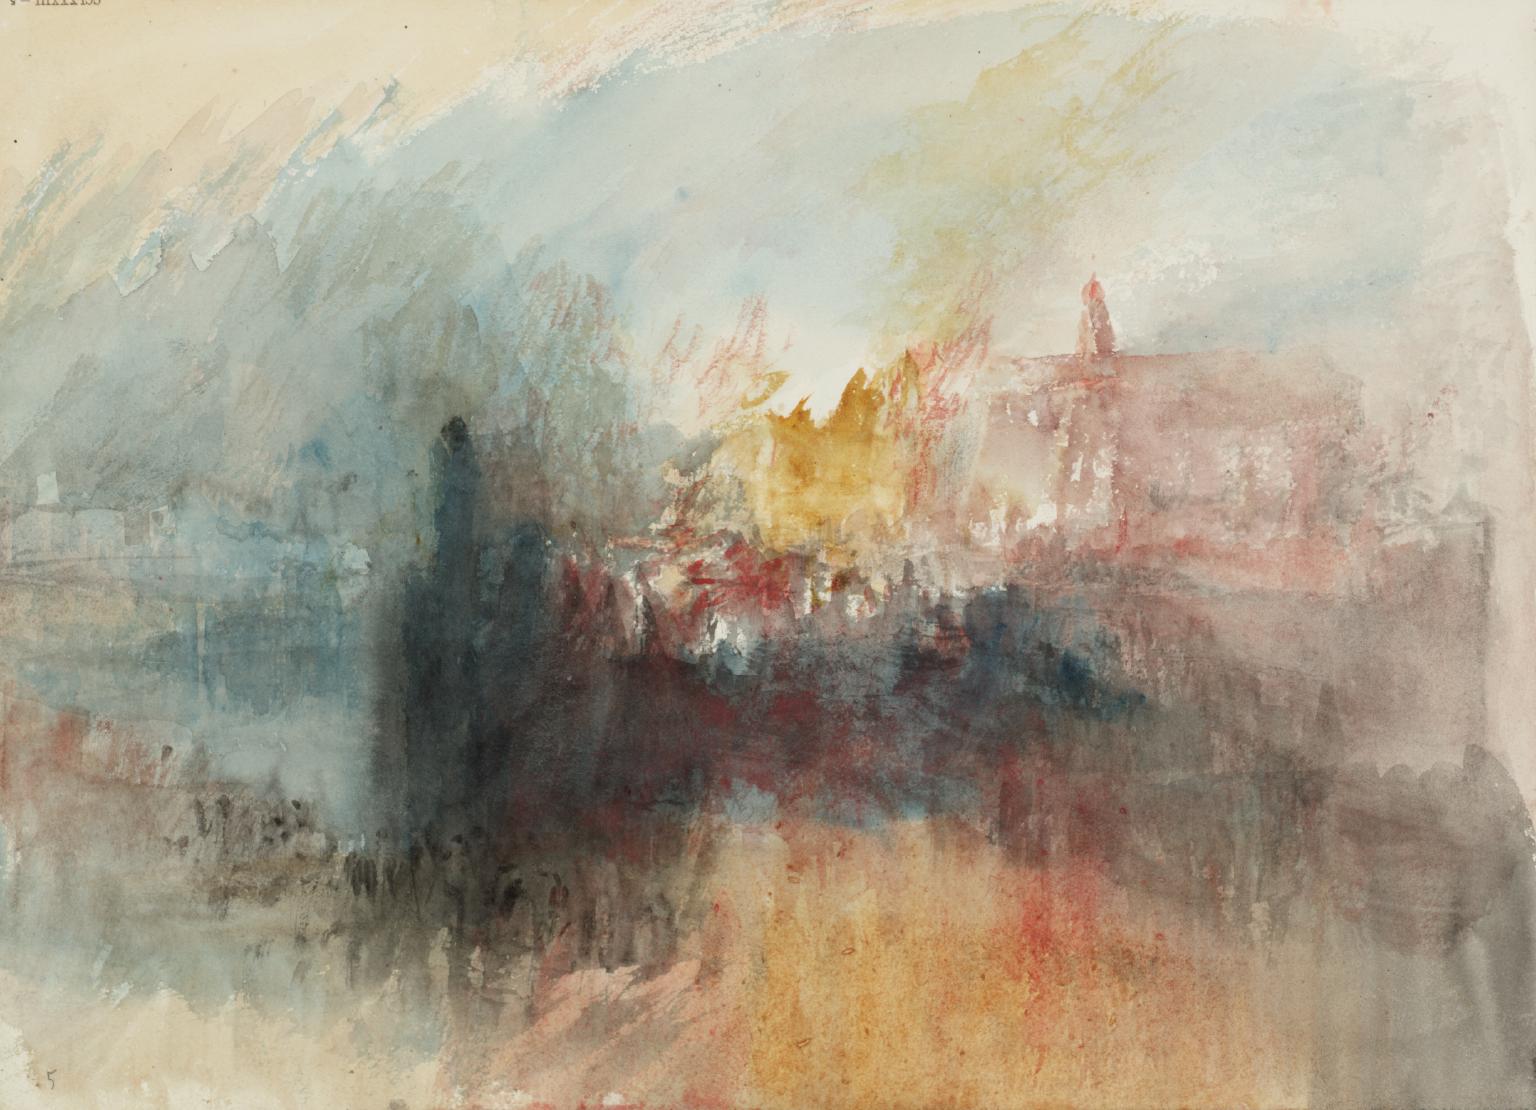 William Turner, Fire at the Grand Storehouse of the Tower of London, 1841 (TATE)